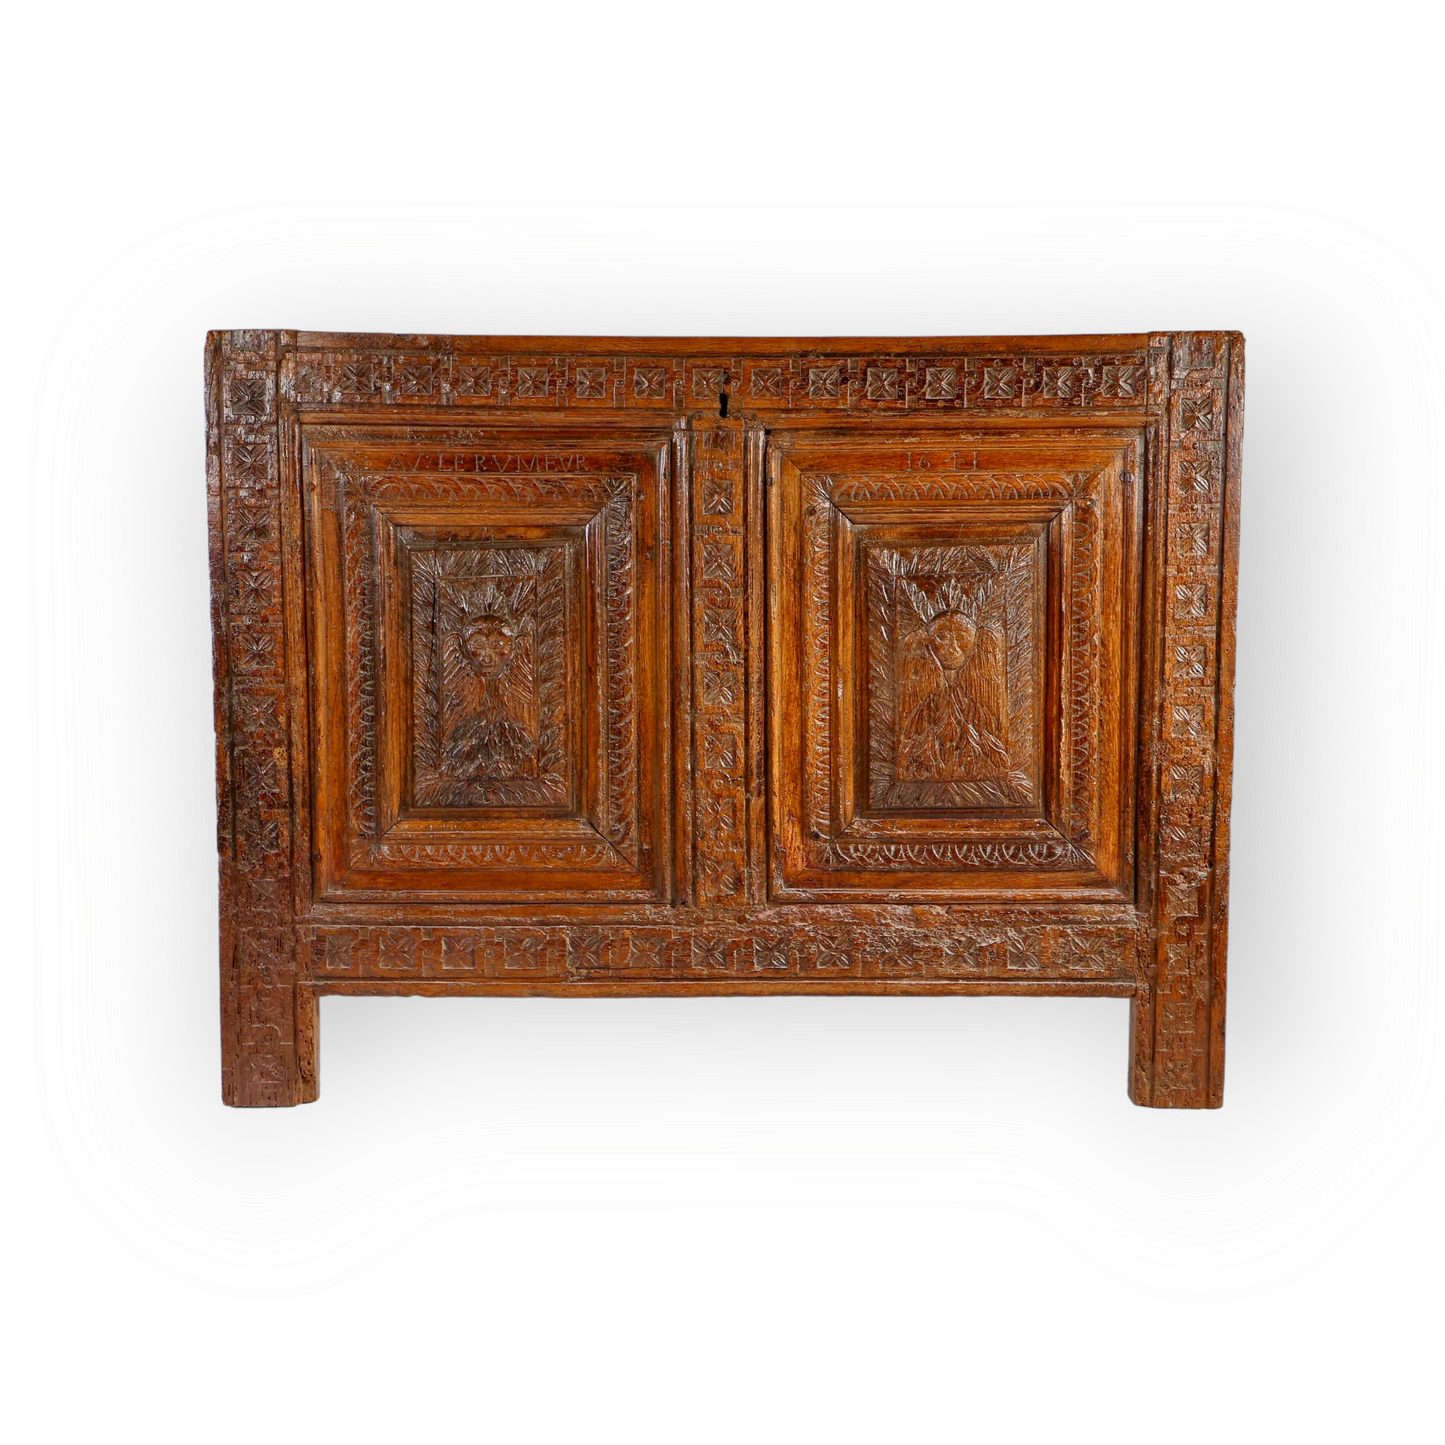 17th Century French Antique Oak Coffer Front Dated 1641 - Ideal as a Headboard